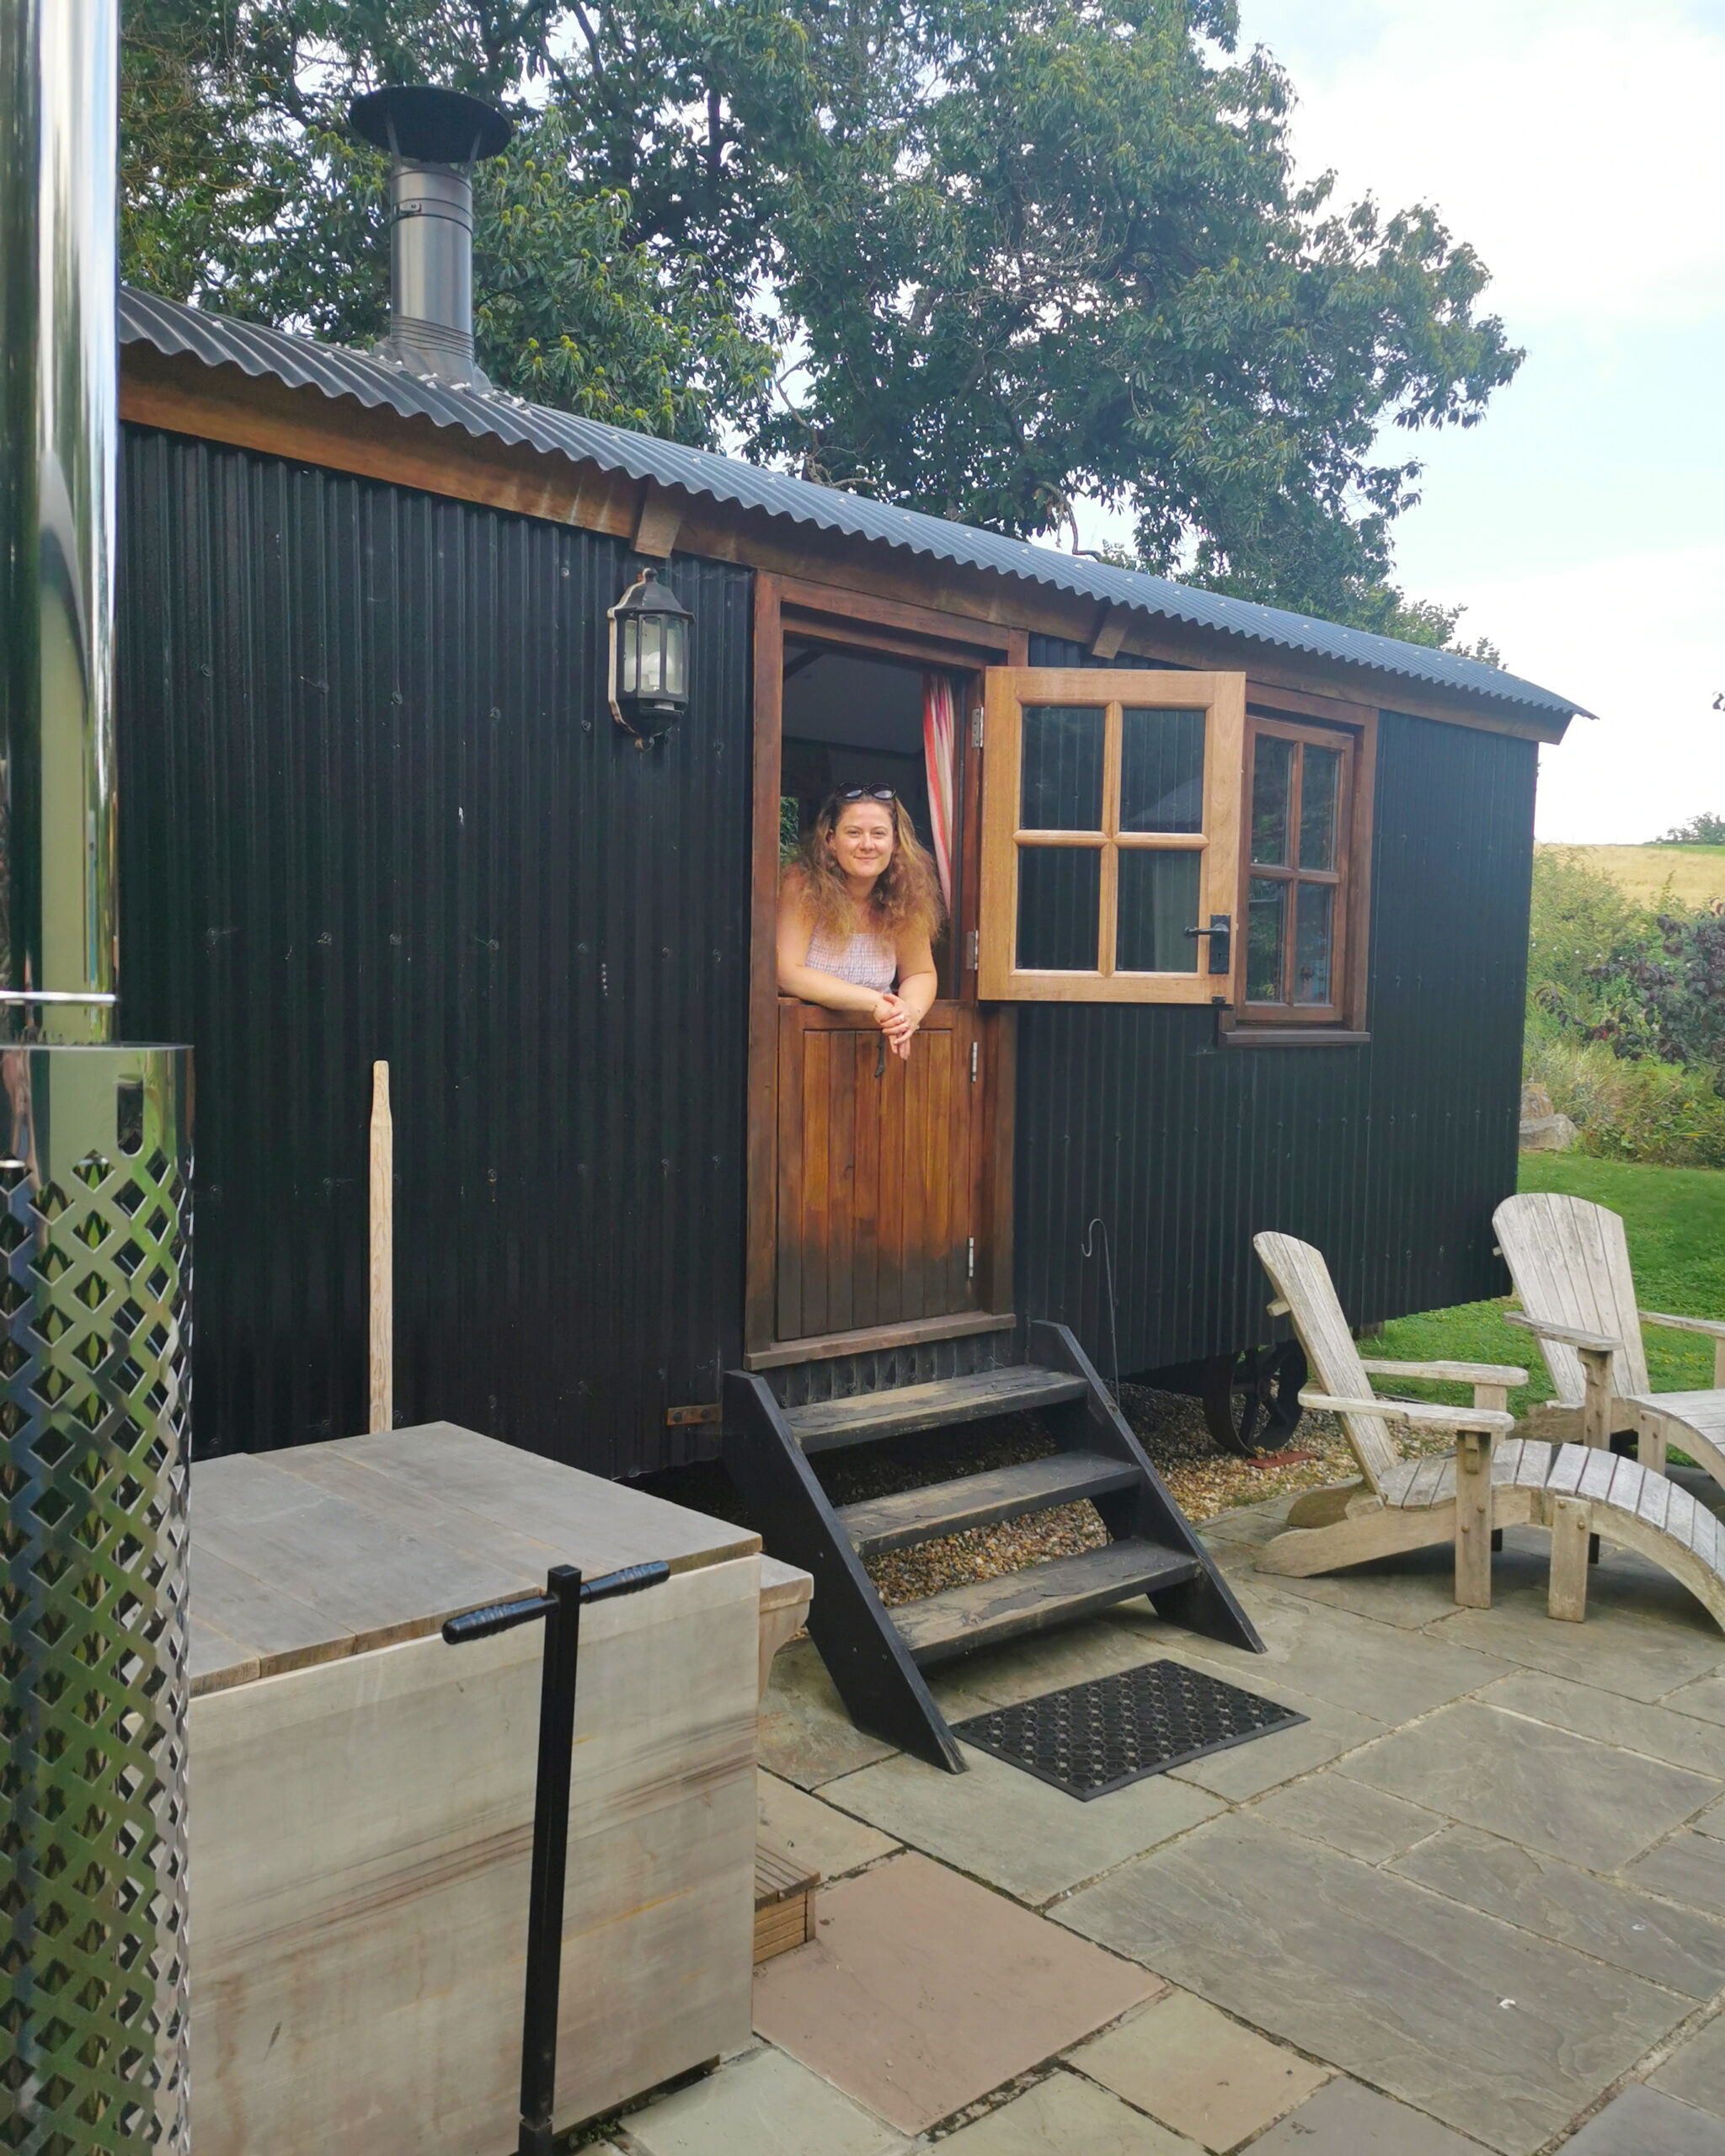 The Merry Harriers, Shepherd's Hut, Glamping, Surrey Staycation, Luxury Glamping, Family Staycation, Surrey, Godalming, The Frenchie Mummy, Press Trip, Family-Friendly, Staycation, Llama Trek, Llamas, Hot Tub, Country Adventures